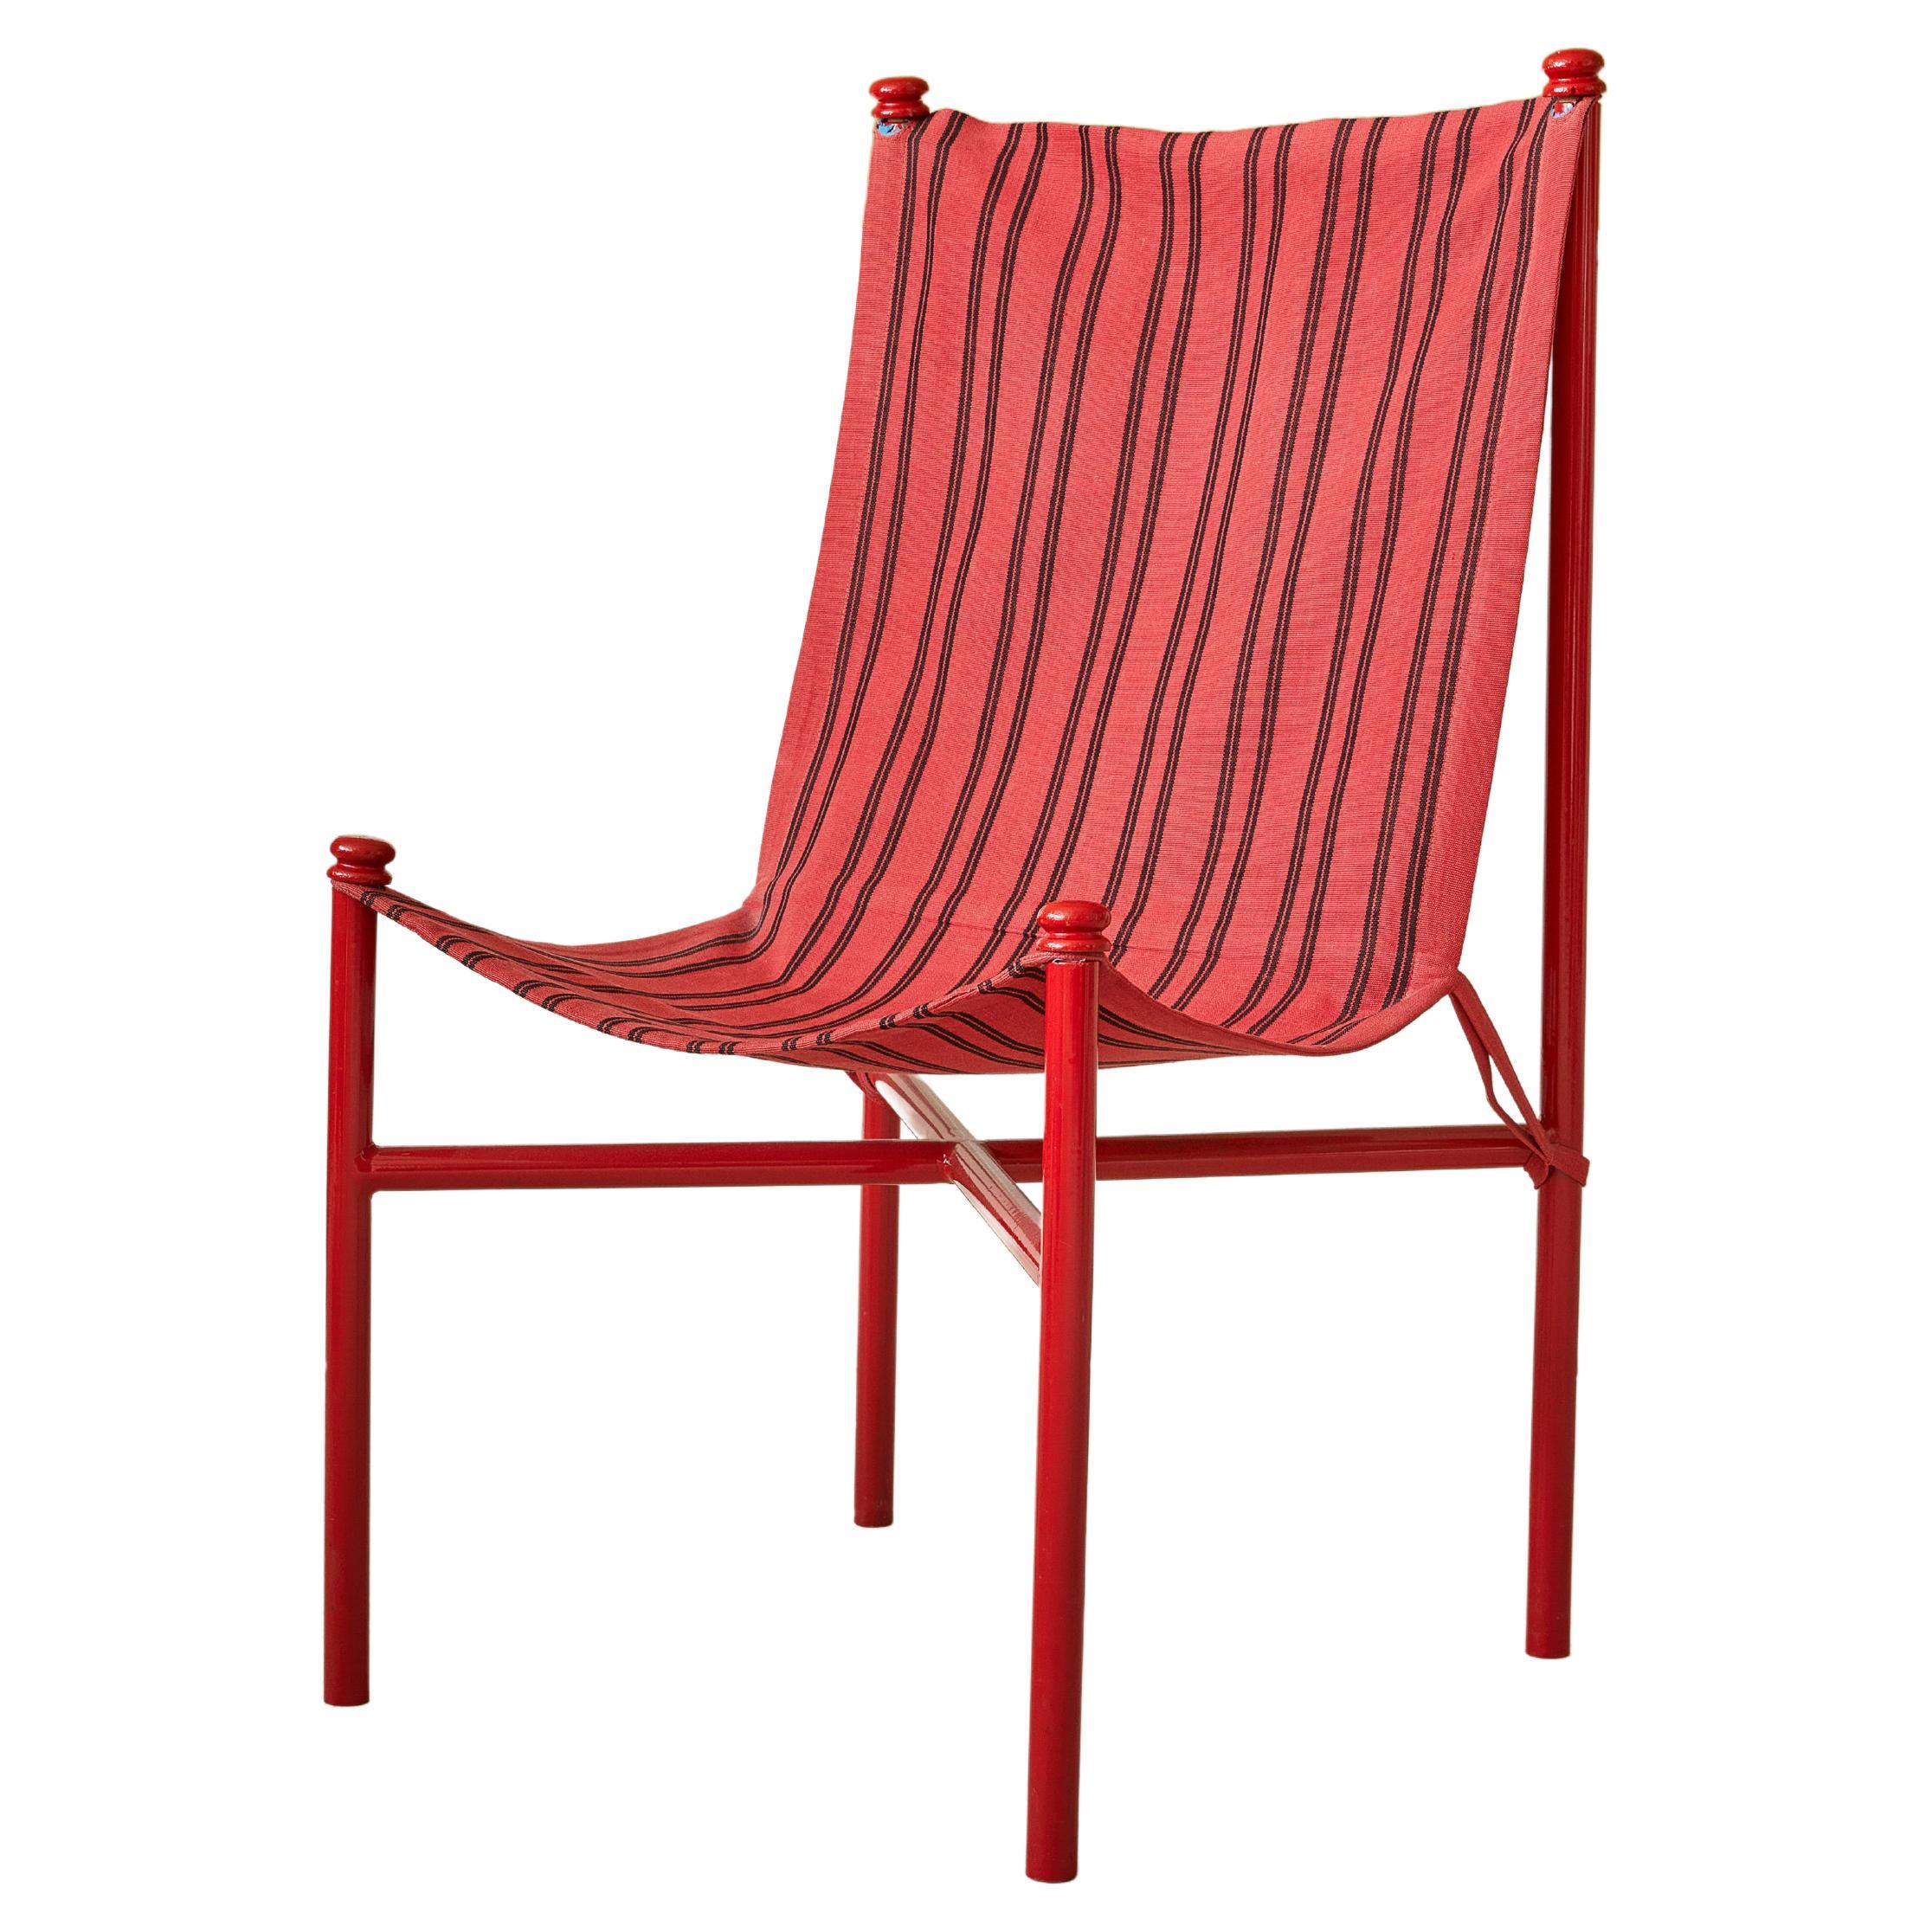 Vintage Felix Aublet Red Steel and Fabric Chair Designed in 1935